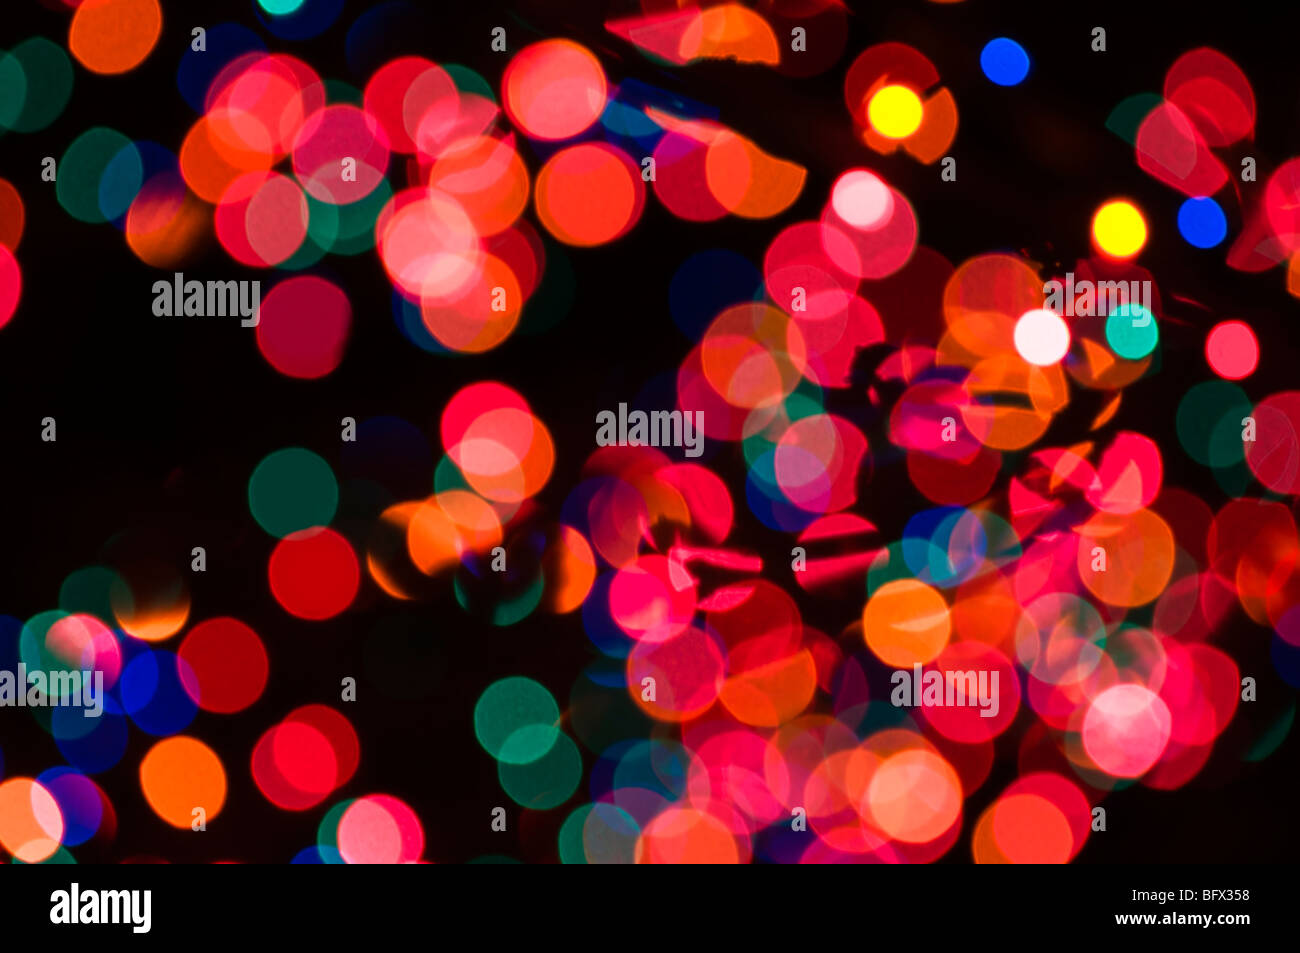 Christmas light abstract glows with vibrant color. Stock Photo